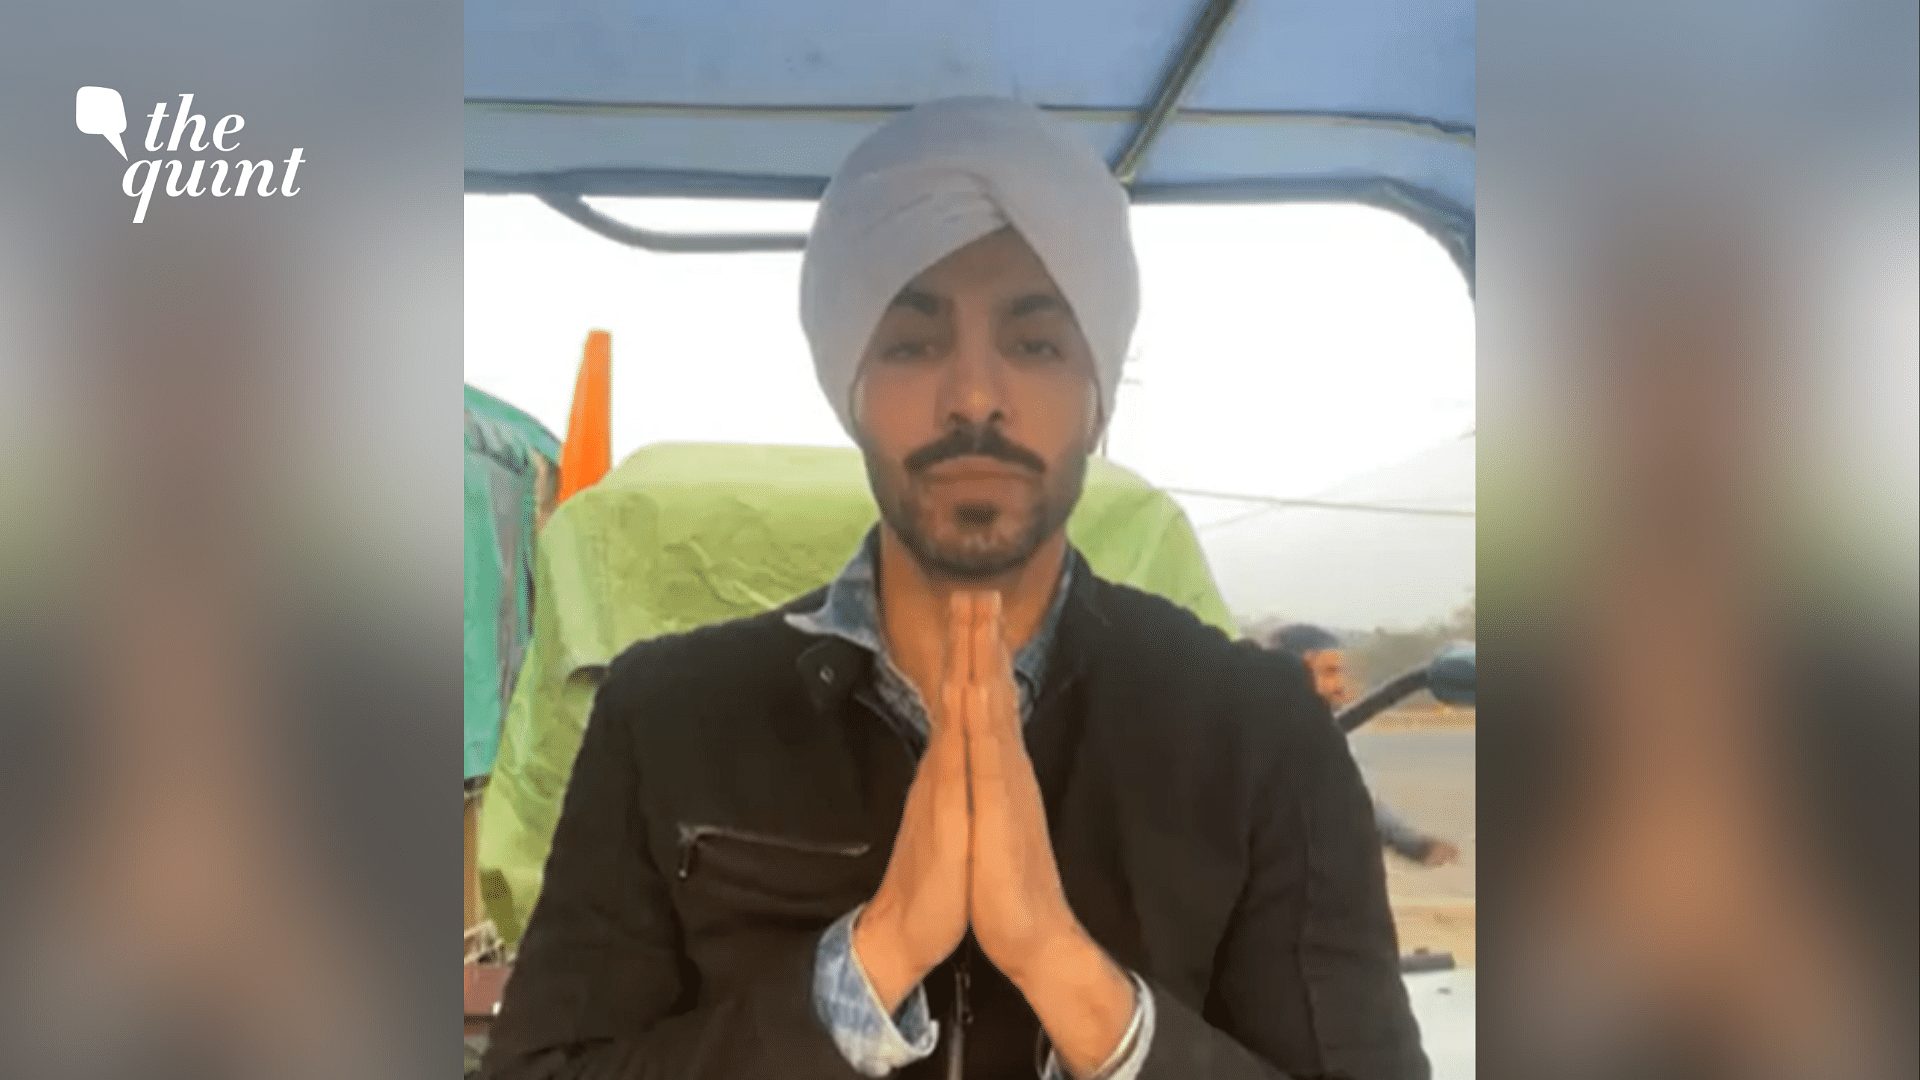 Deep Sidhu was seen at the forefront of the farmers’ protest that started in November 2020 against the three farm laws introduced by the Centre.